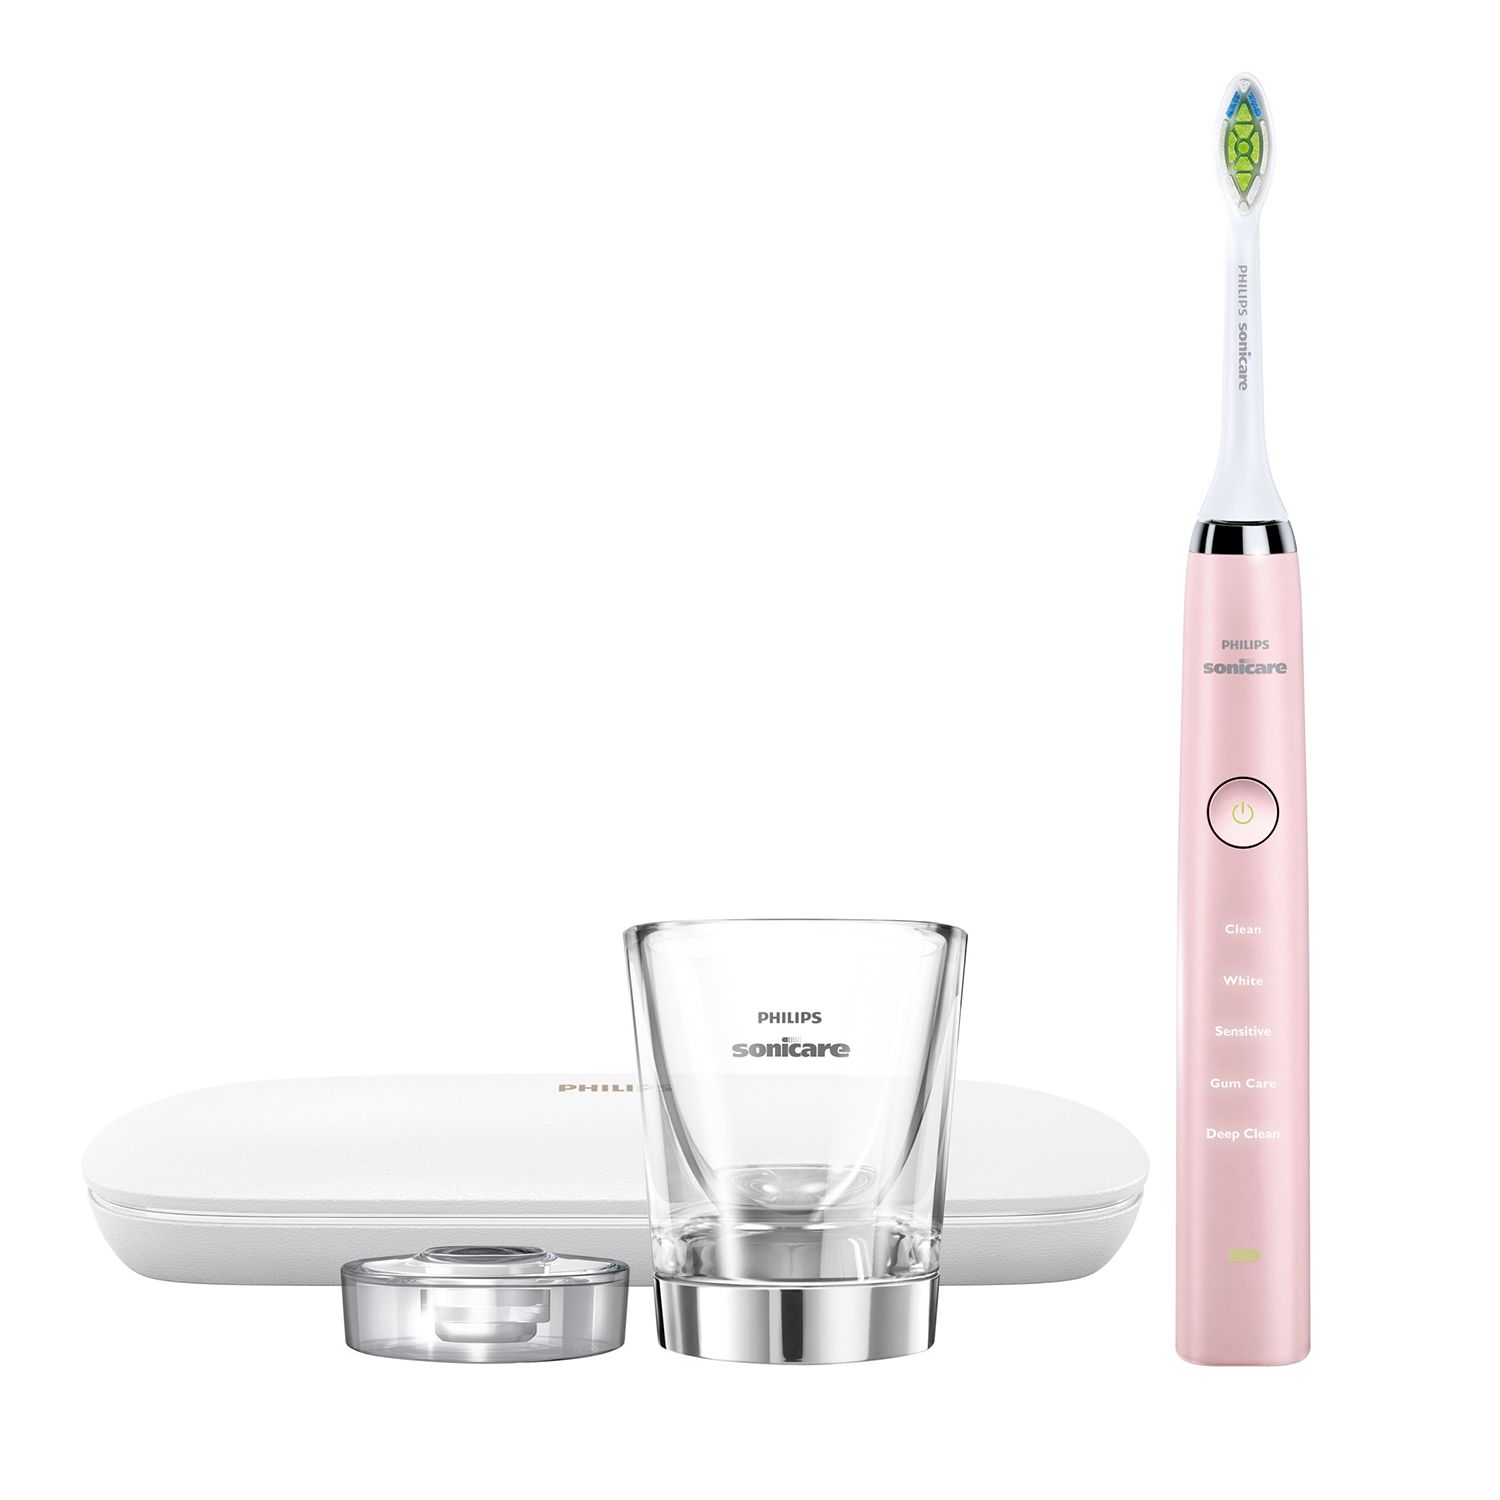 electric toothbrush offers